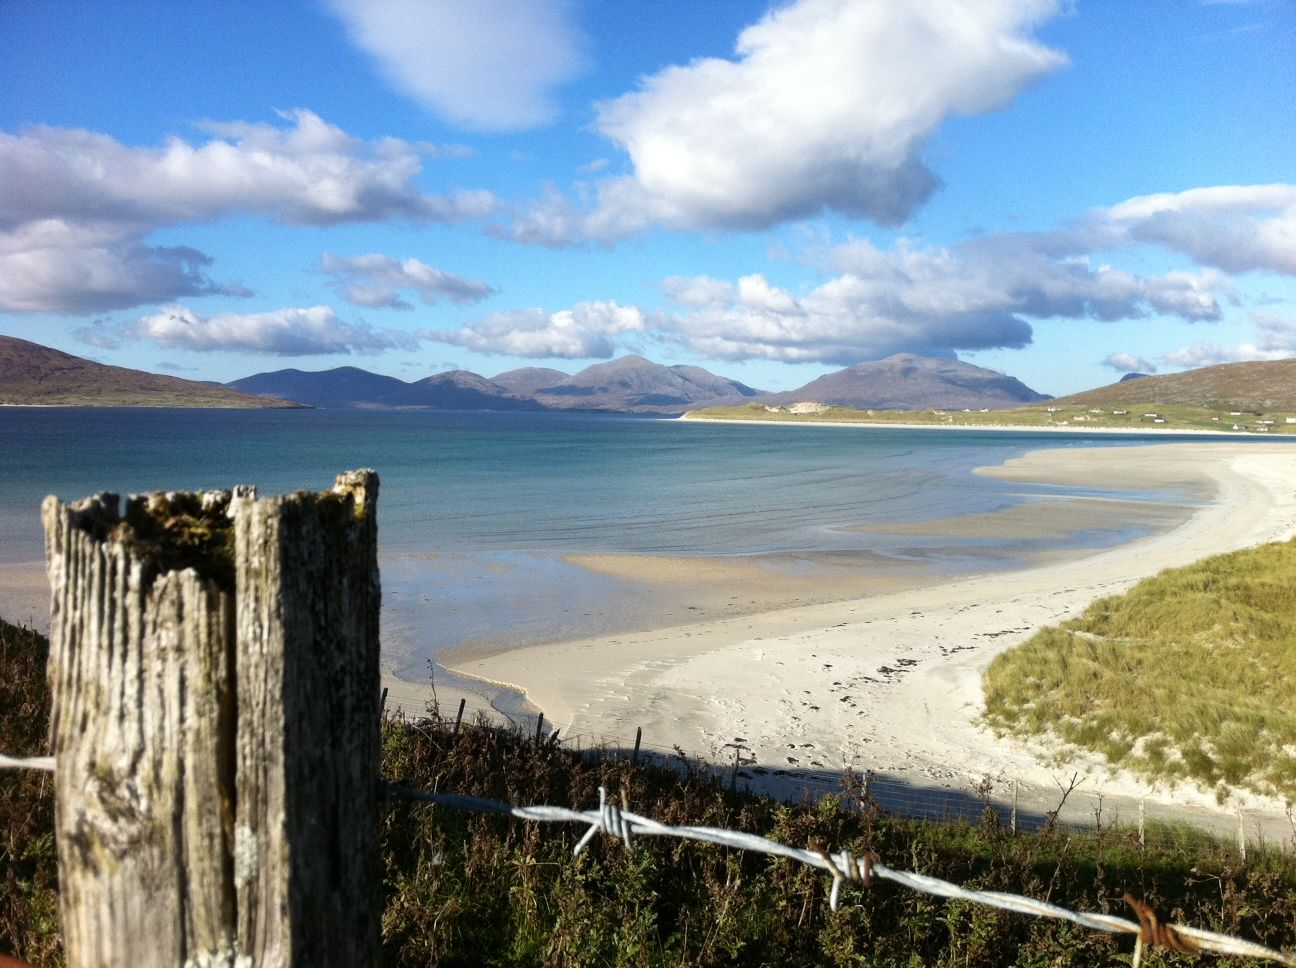 This October 2013 photo shows the startling white-sand beaches on the west coast of the Outer Hebrides in Scotland. The beaches are an easy draw for travelers, though getting into the cold water above your ankles in cooler weather takes some courage _ and a squeal. (AP Photo/Cara Anna)